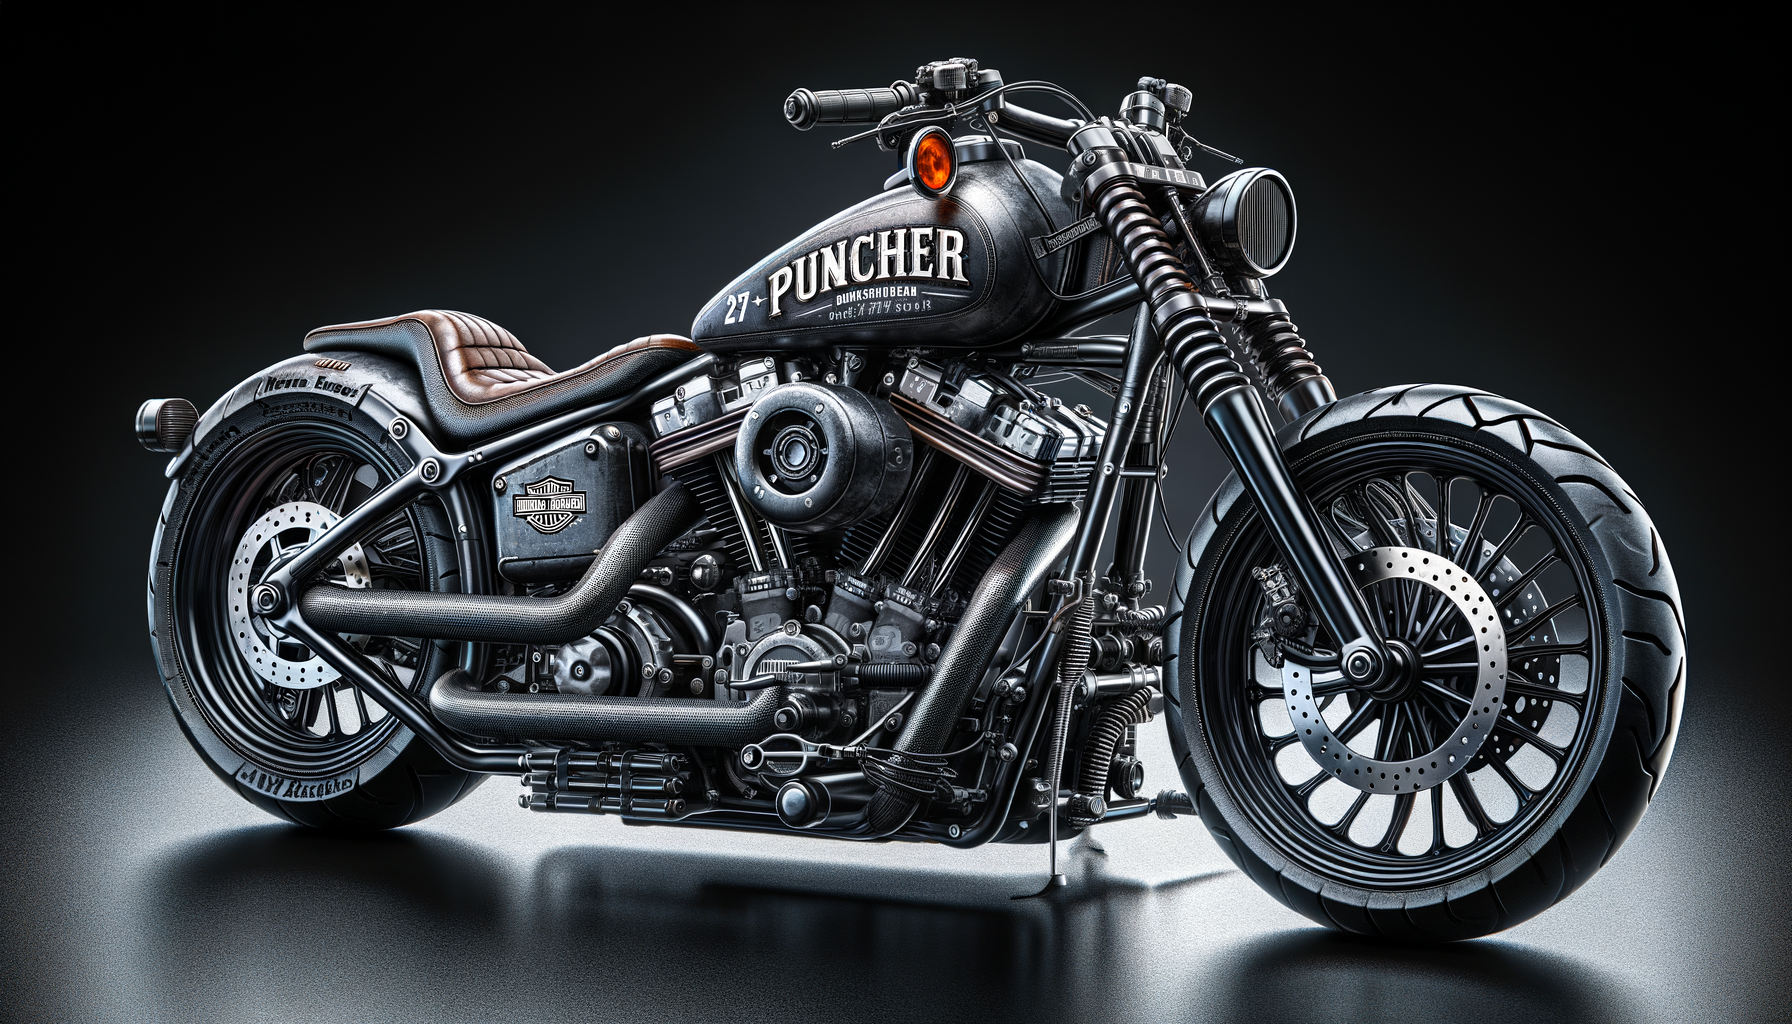 harley-davidson puncher is a custom 2016 dyna designed to leave you speechless with its unique customizations and powerful performance.